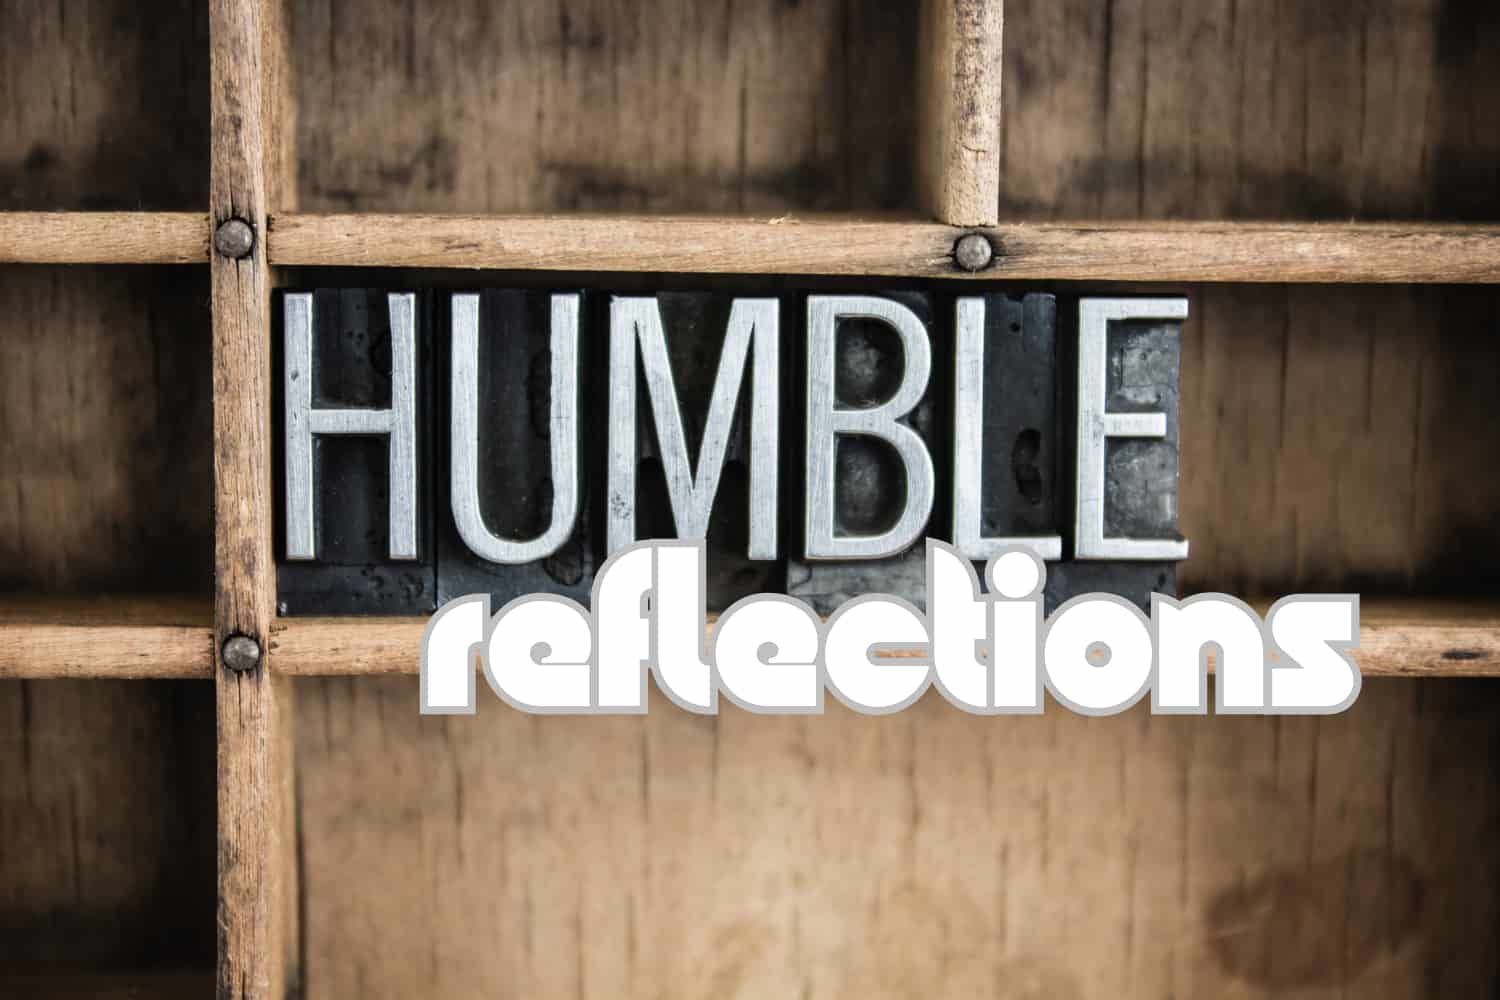 Object%20lesson%20-%20NT%20The%20pharisee%20and%20the%20tax%20collector%20-%20Humble%20reflections-5792de36 Belonging / excluding